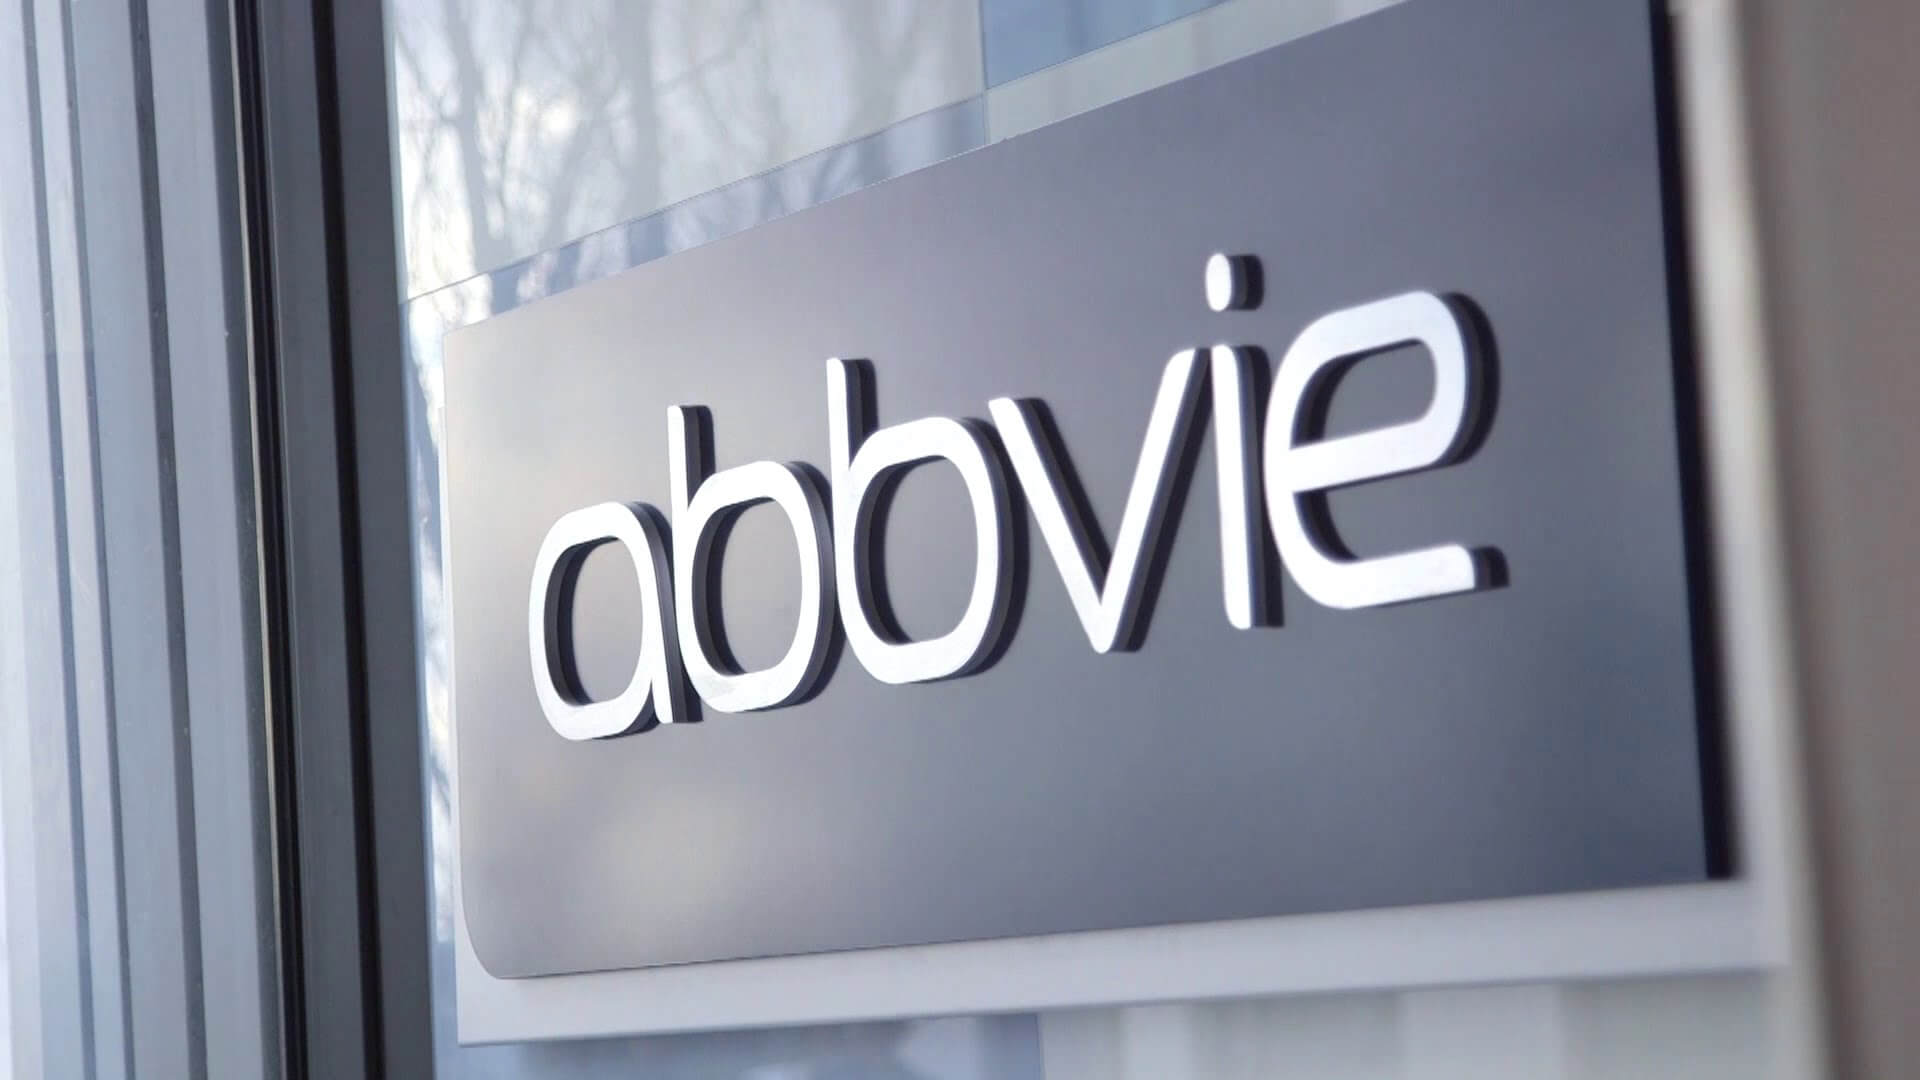 AbbVie Exercises its Option to License Agreement for BioArctic's Alpha-Synuclein Antibody Portfolio- Signed in 2016